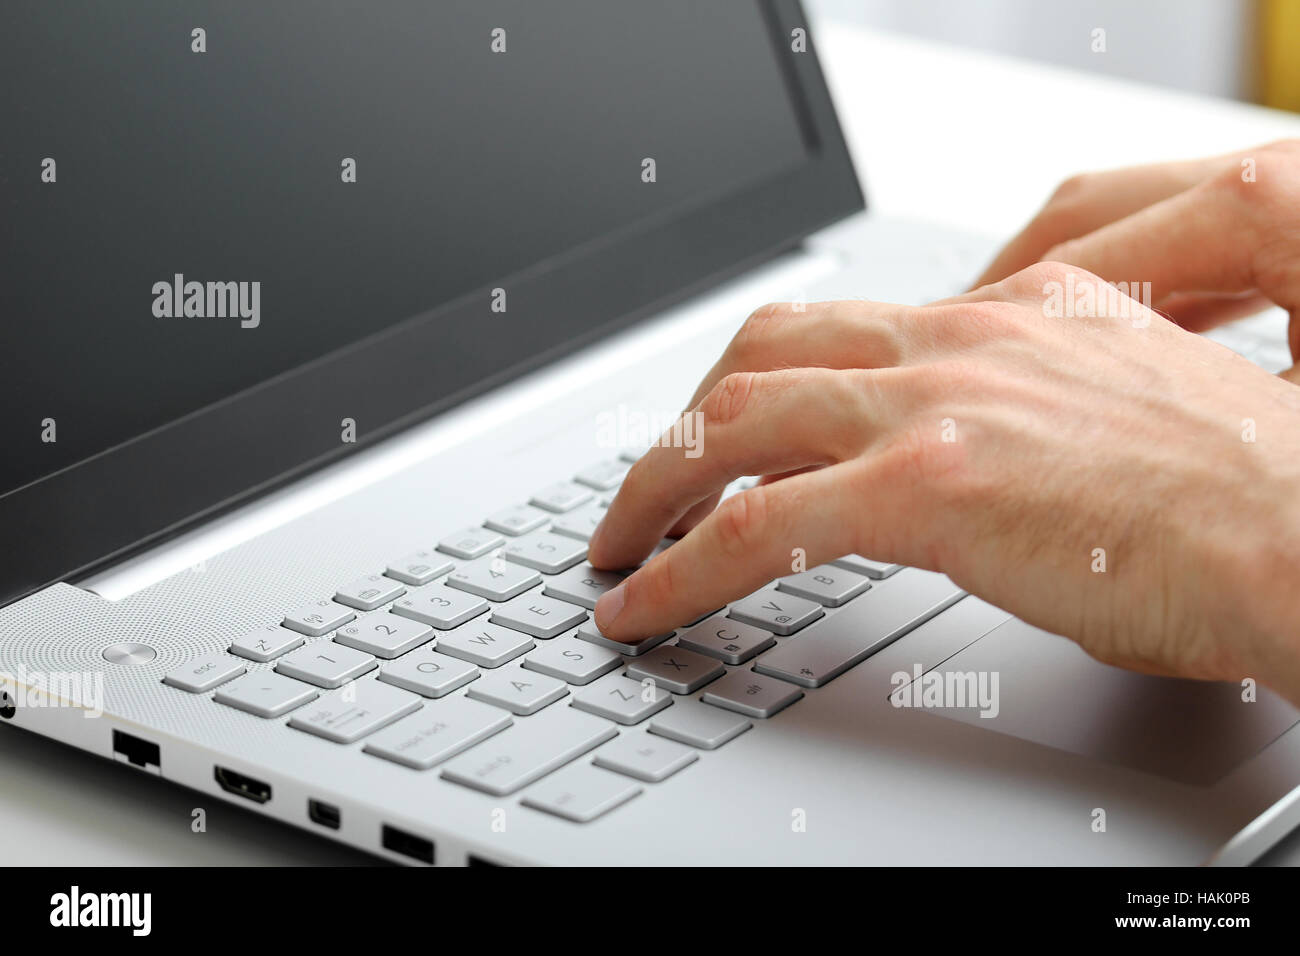 hands typing on laptop keyboard Stock Photo